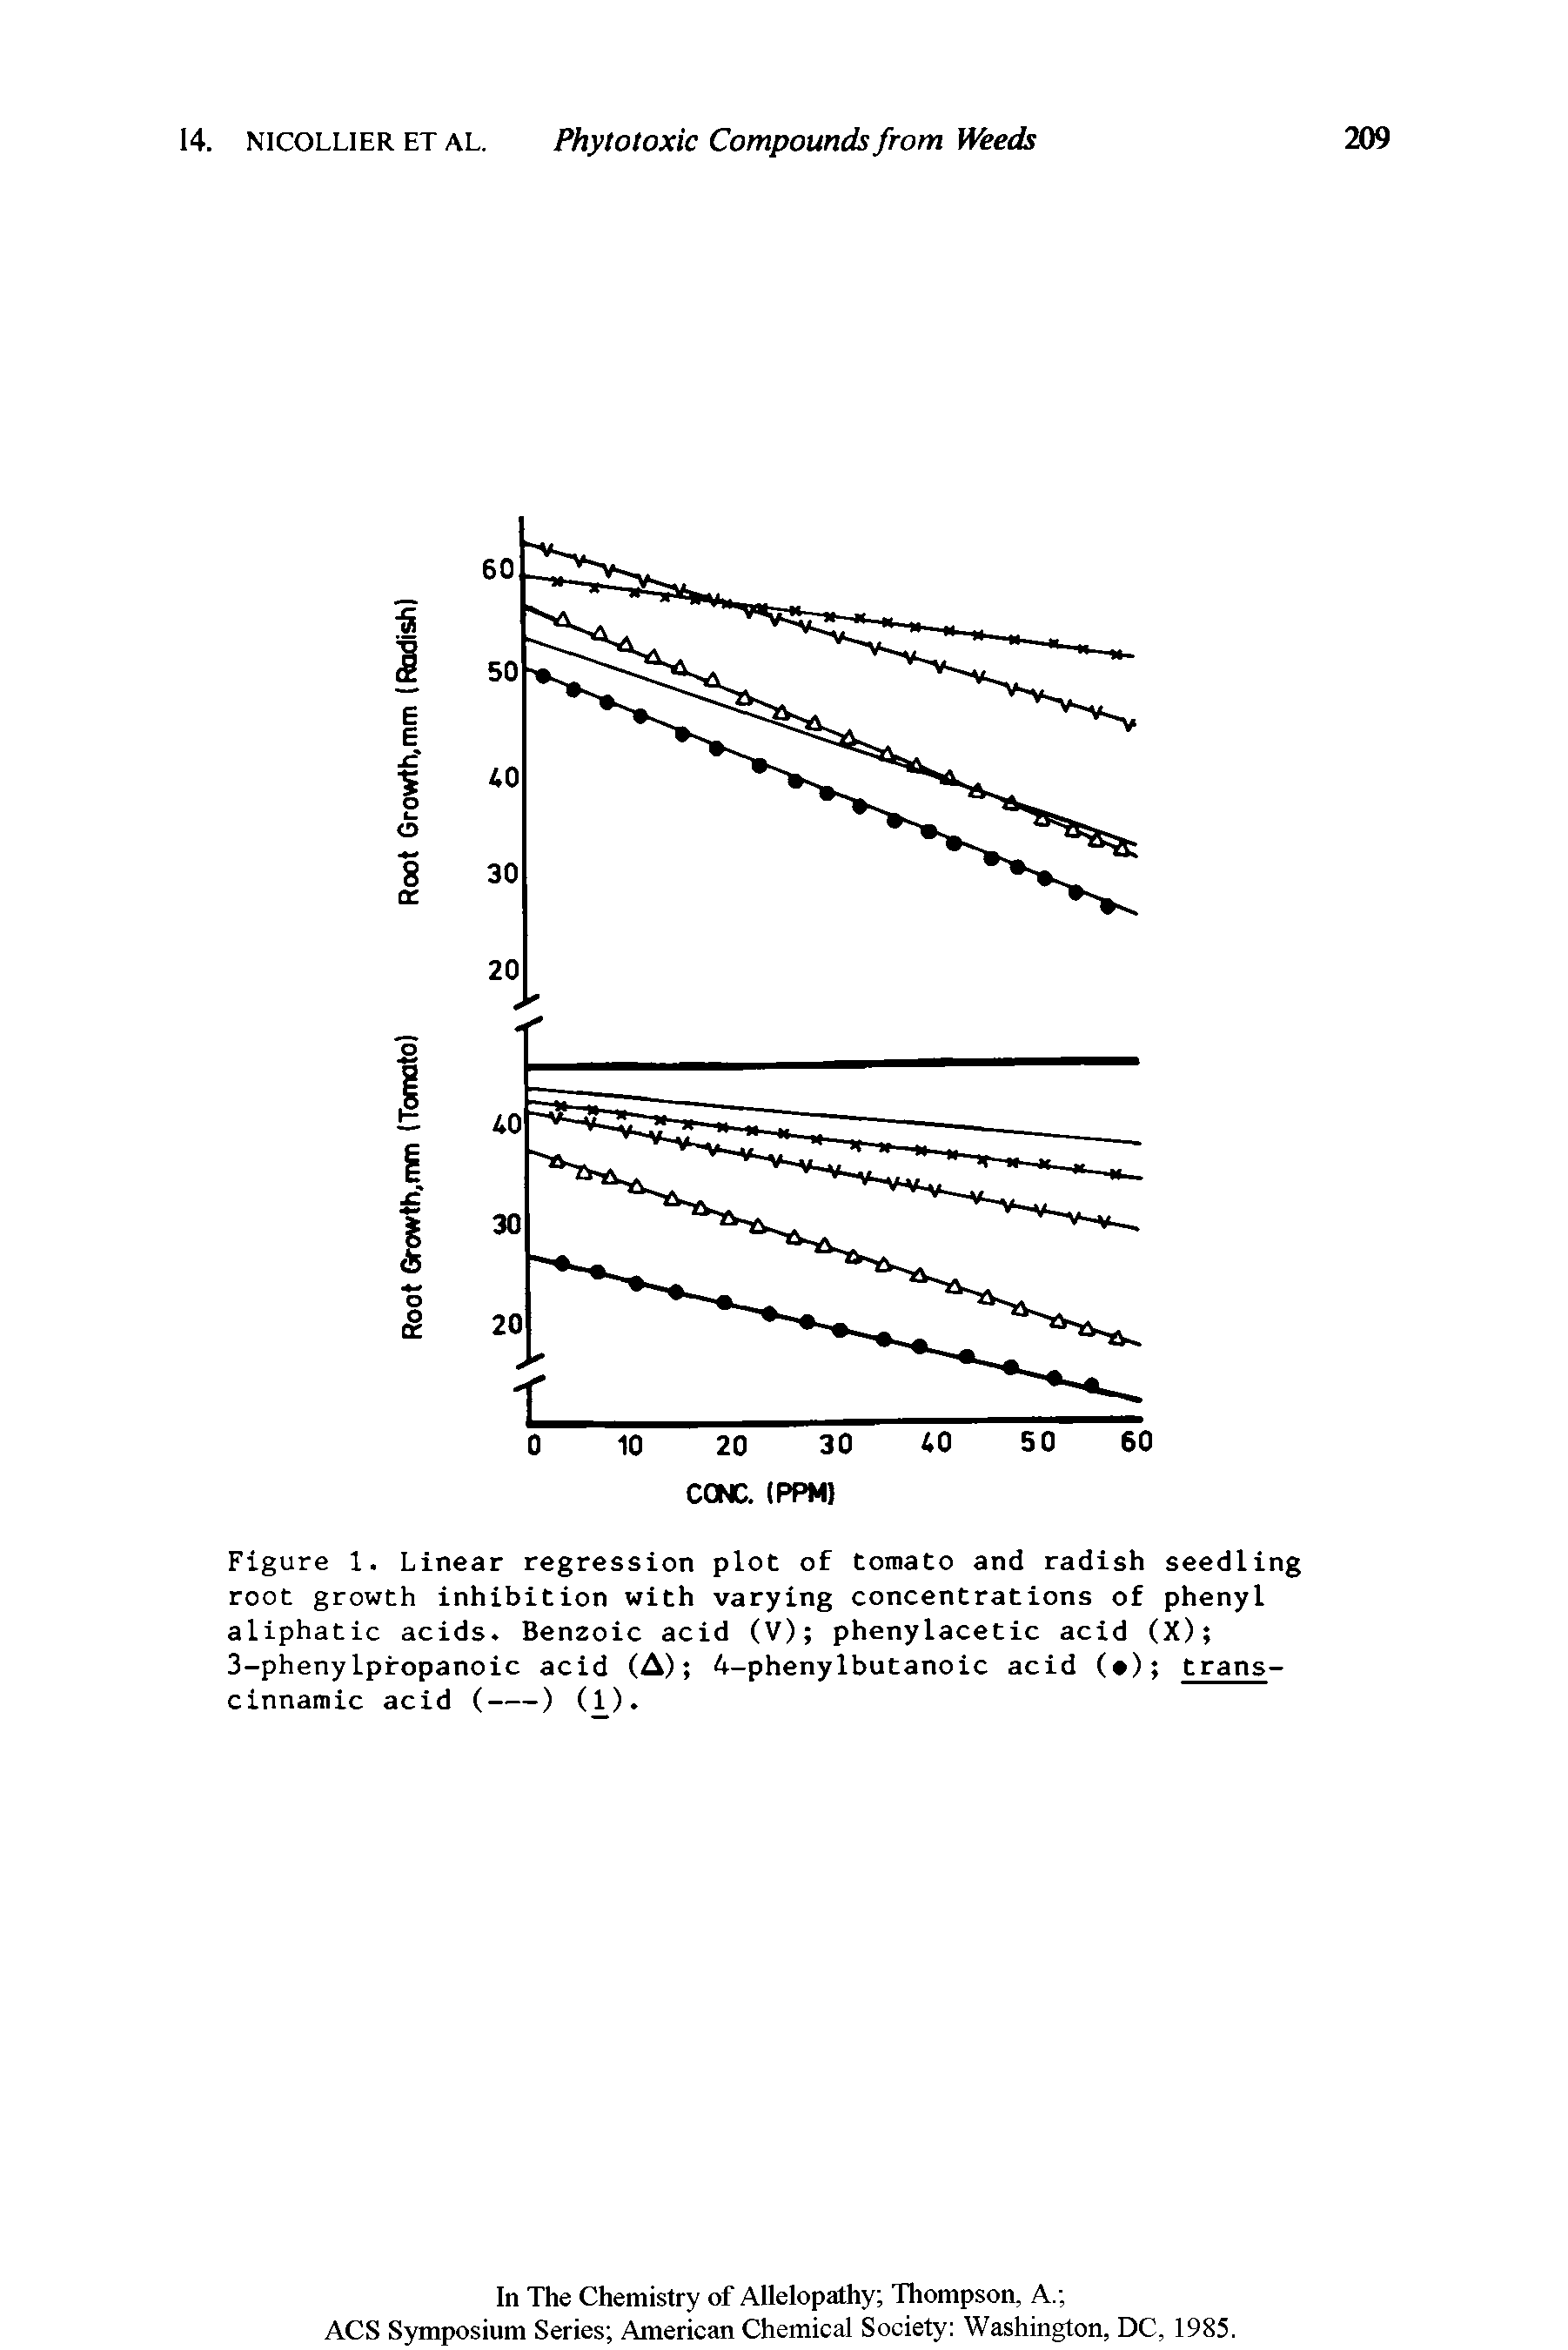 Figure 1. Linear regression plot of tomato and radish seedling root growth inhibition with varying concentrations of phenyl aliphatic acids. Benzoic acid (V) phenylacetic acid (X) 3-phenyIpiropanoic acid (A) 4-phenylbutanoic acid ( ) trans-cinnamic acid (----) (1).